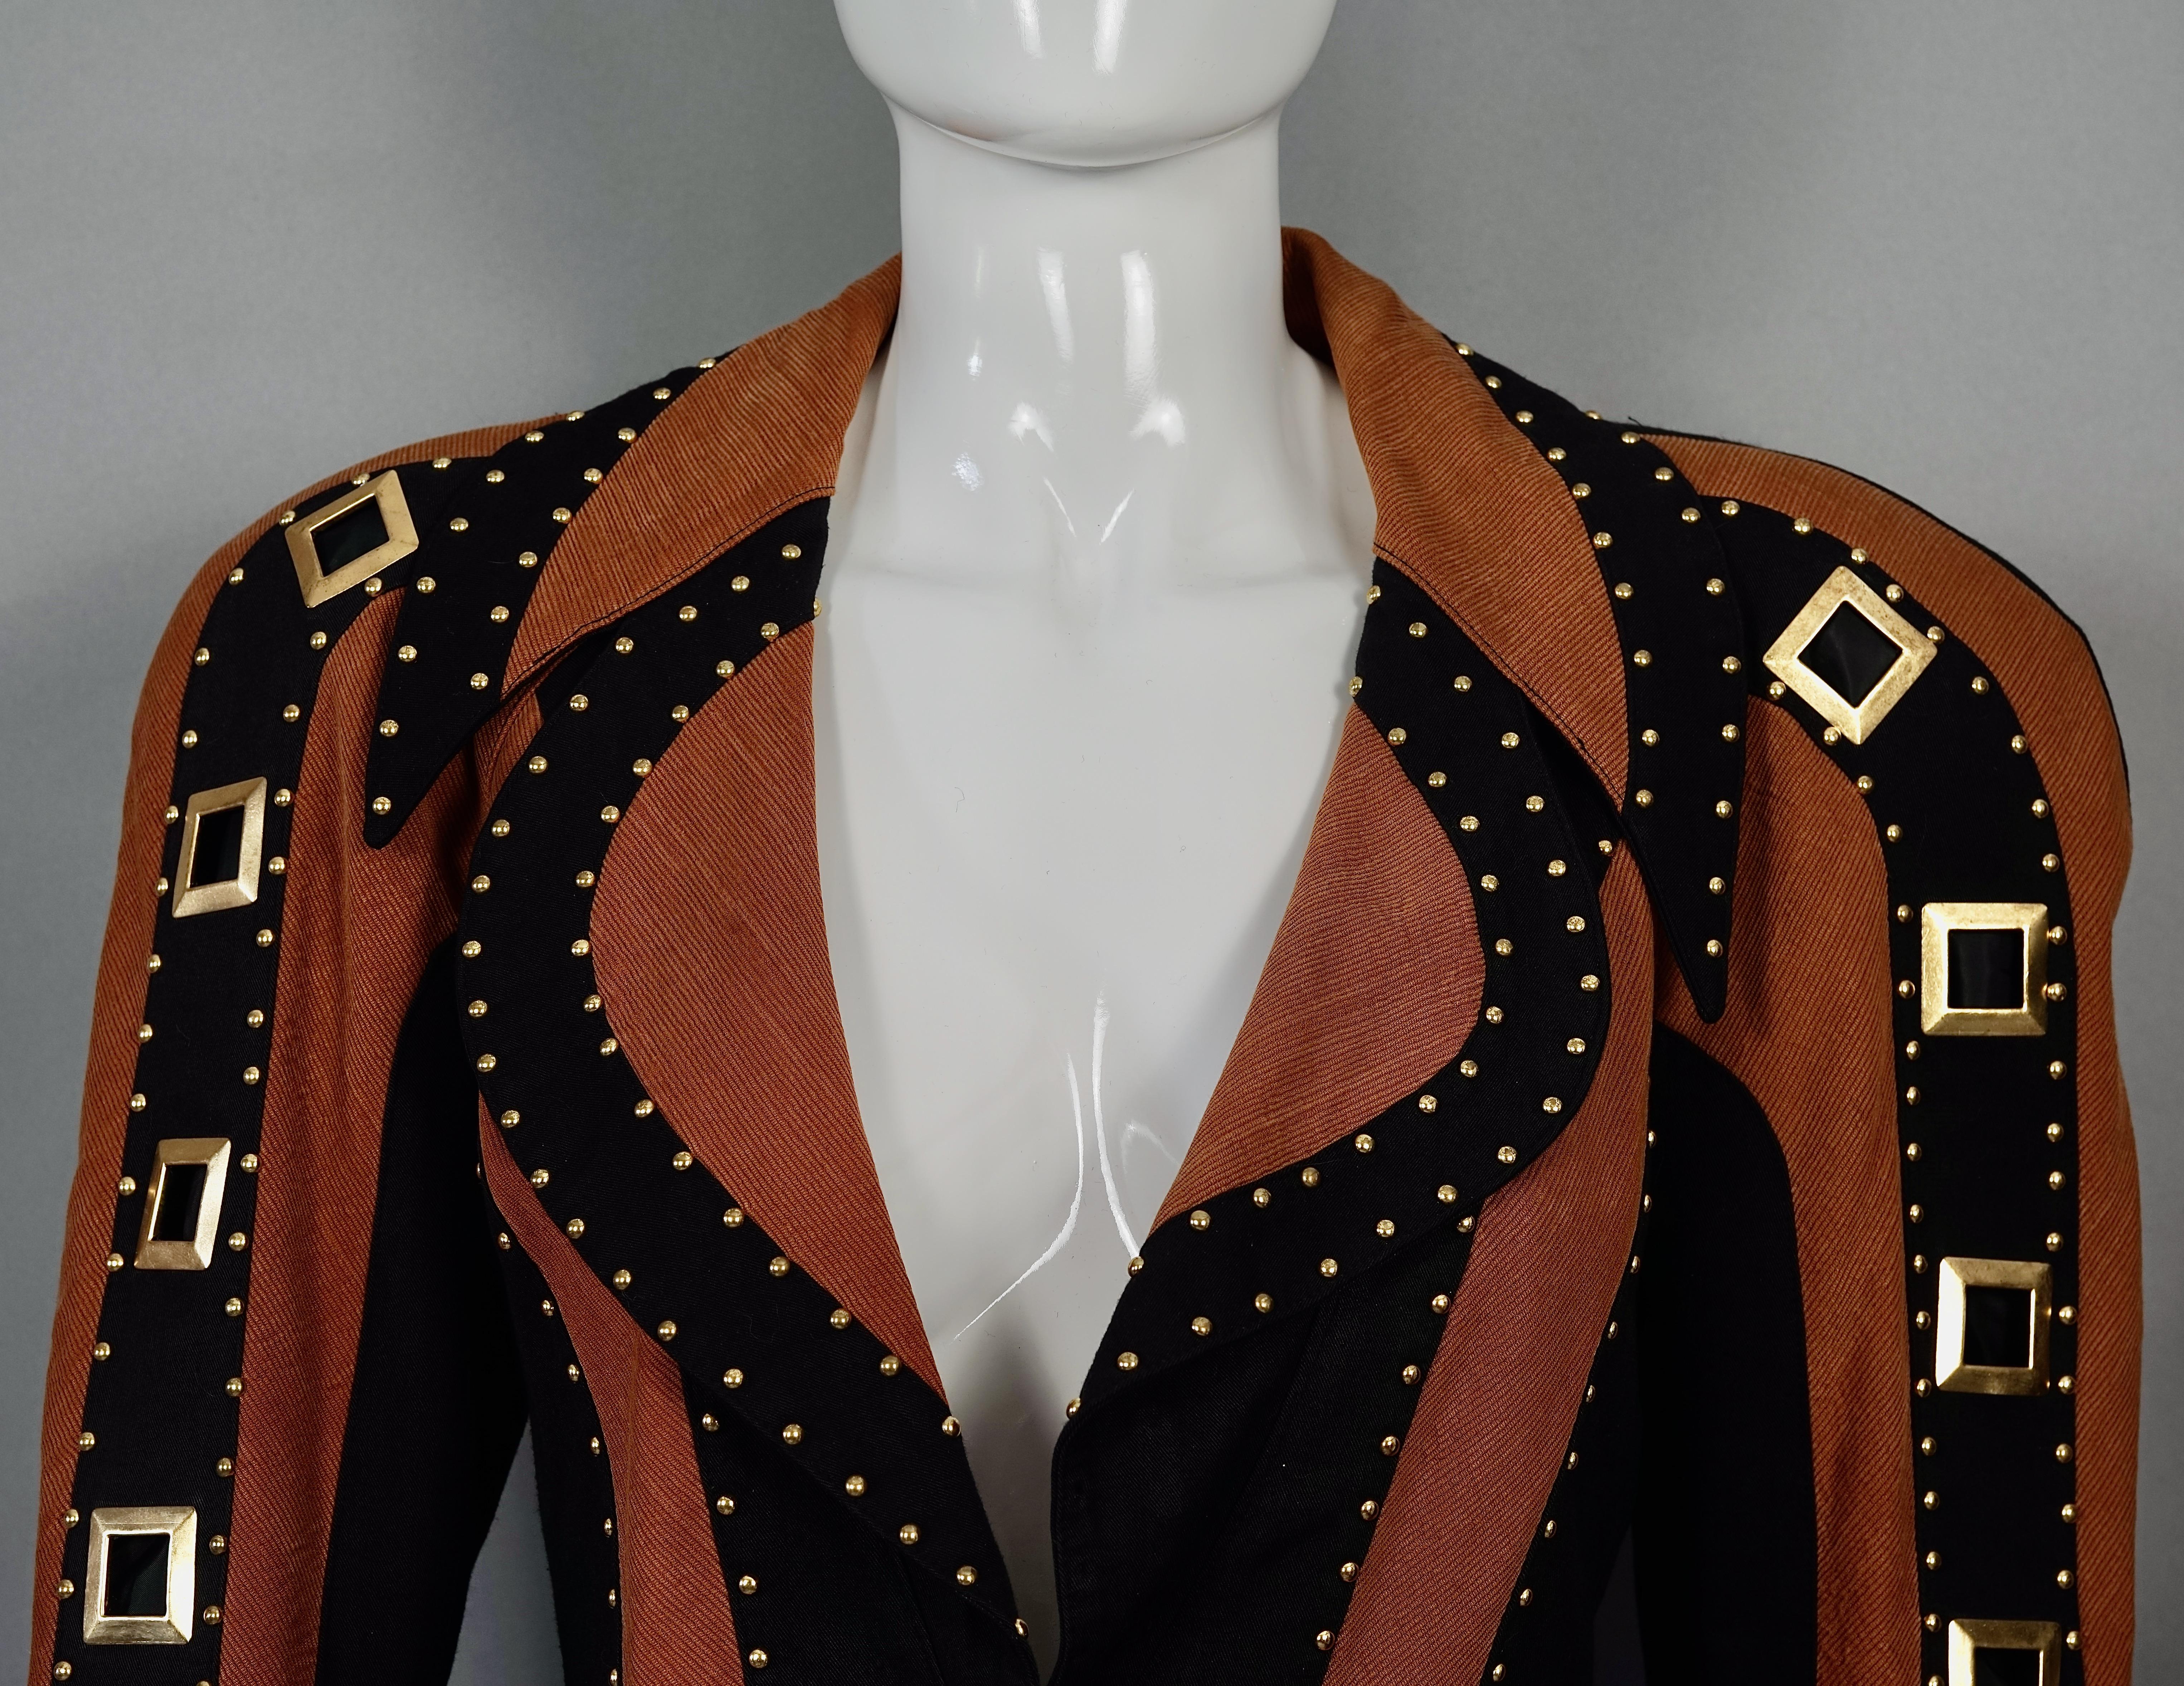 Vintage CHRISTIAN LACROIX Studs and Jeweled Buttons Contrast Jacket 1